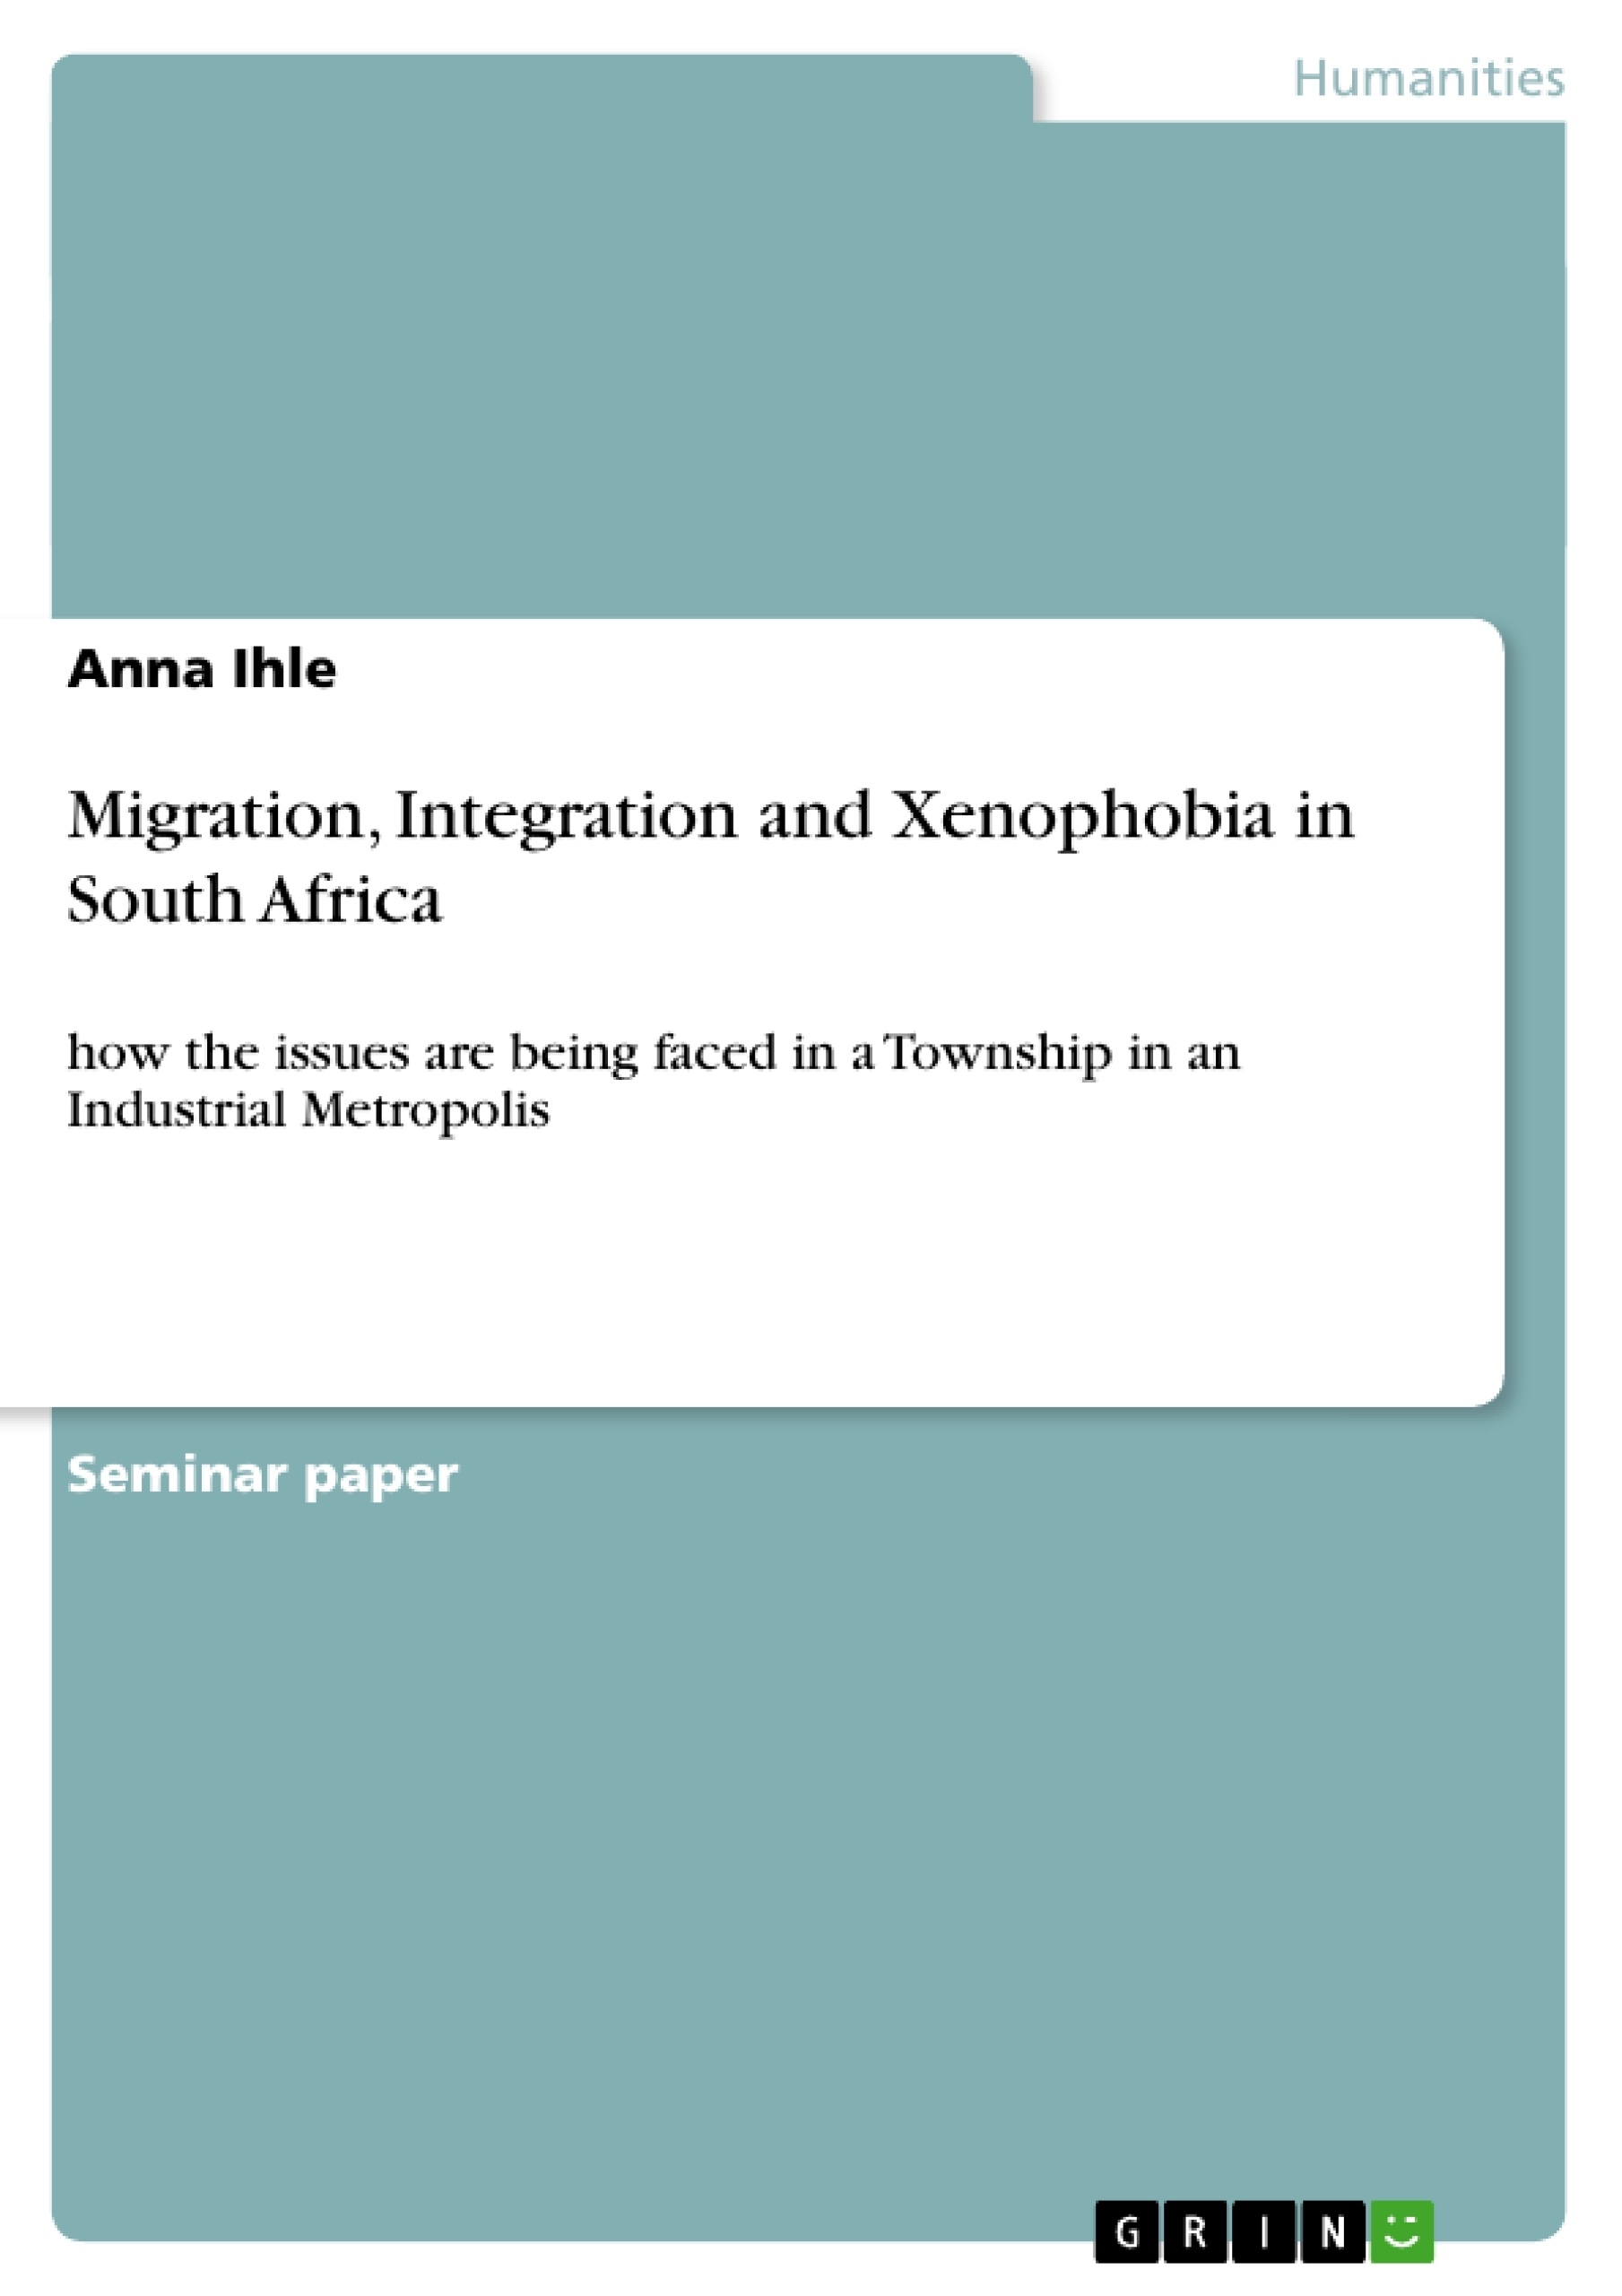 Title: Migration, Integration and Xenophobia in South Africa